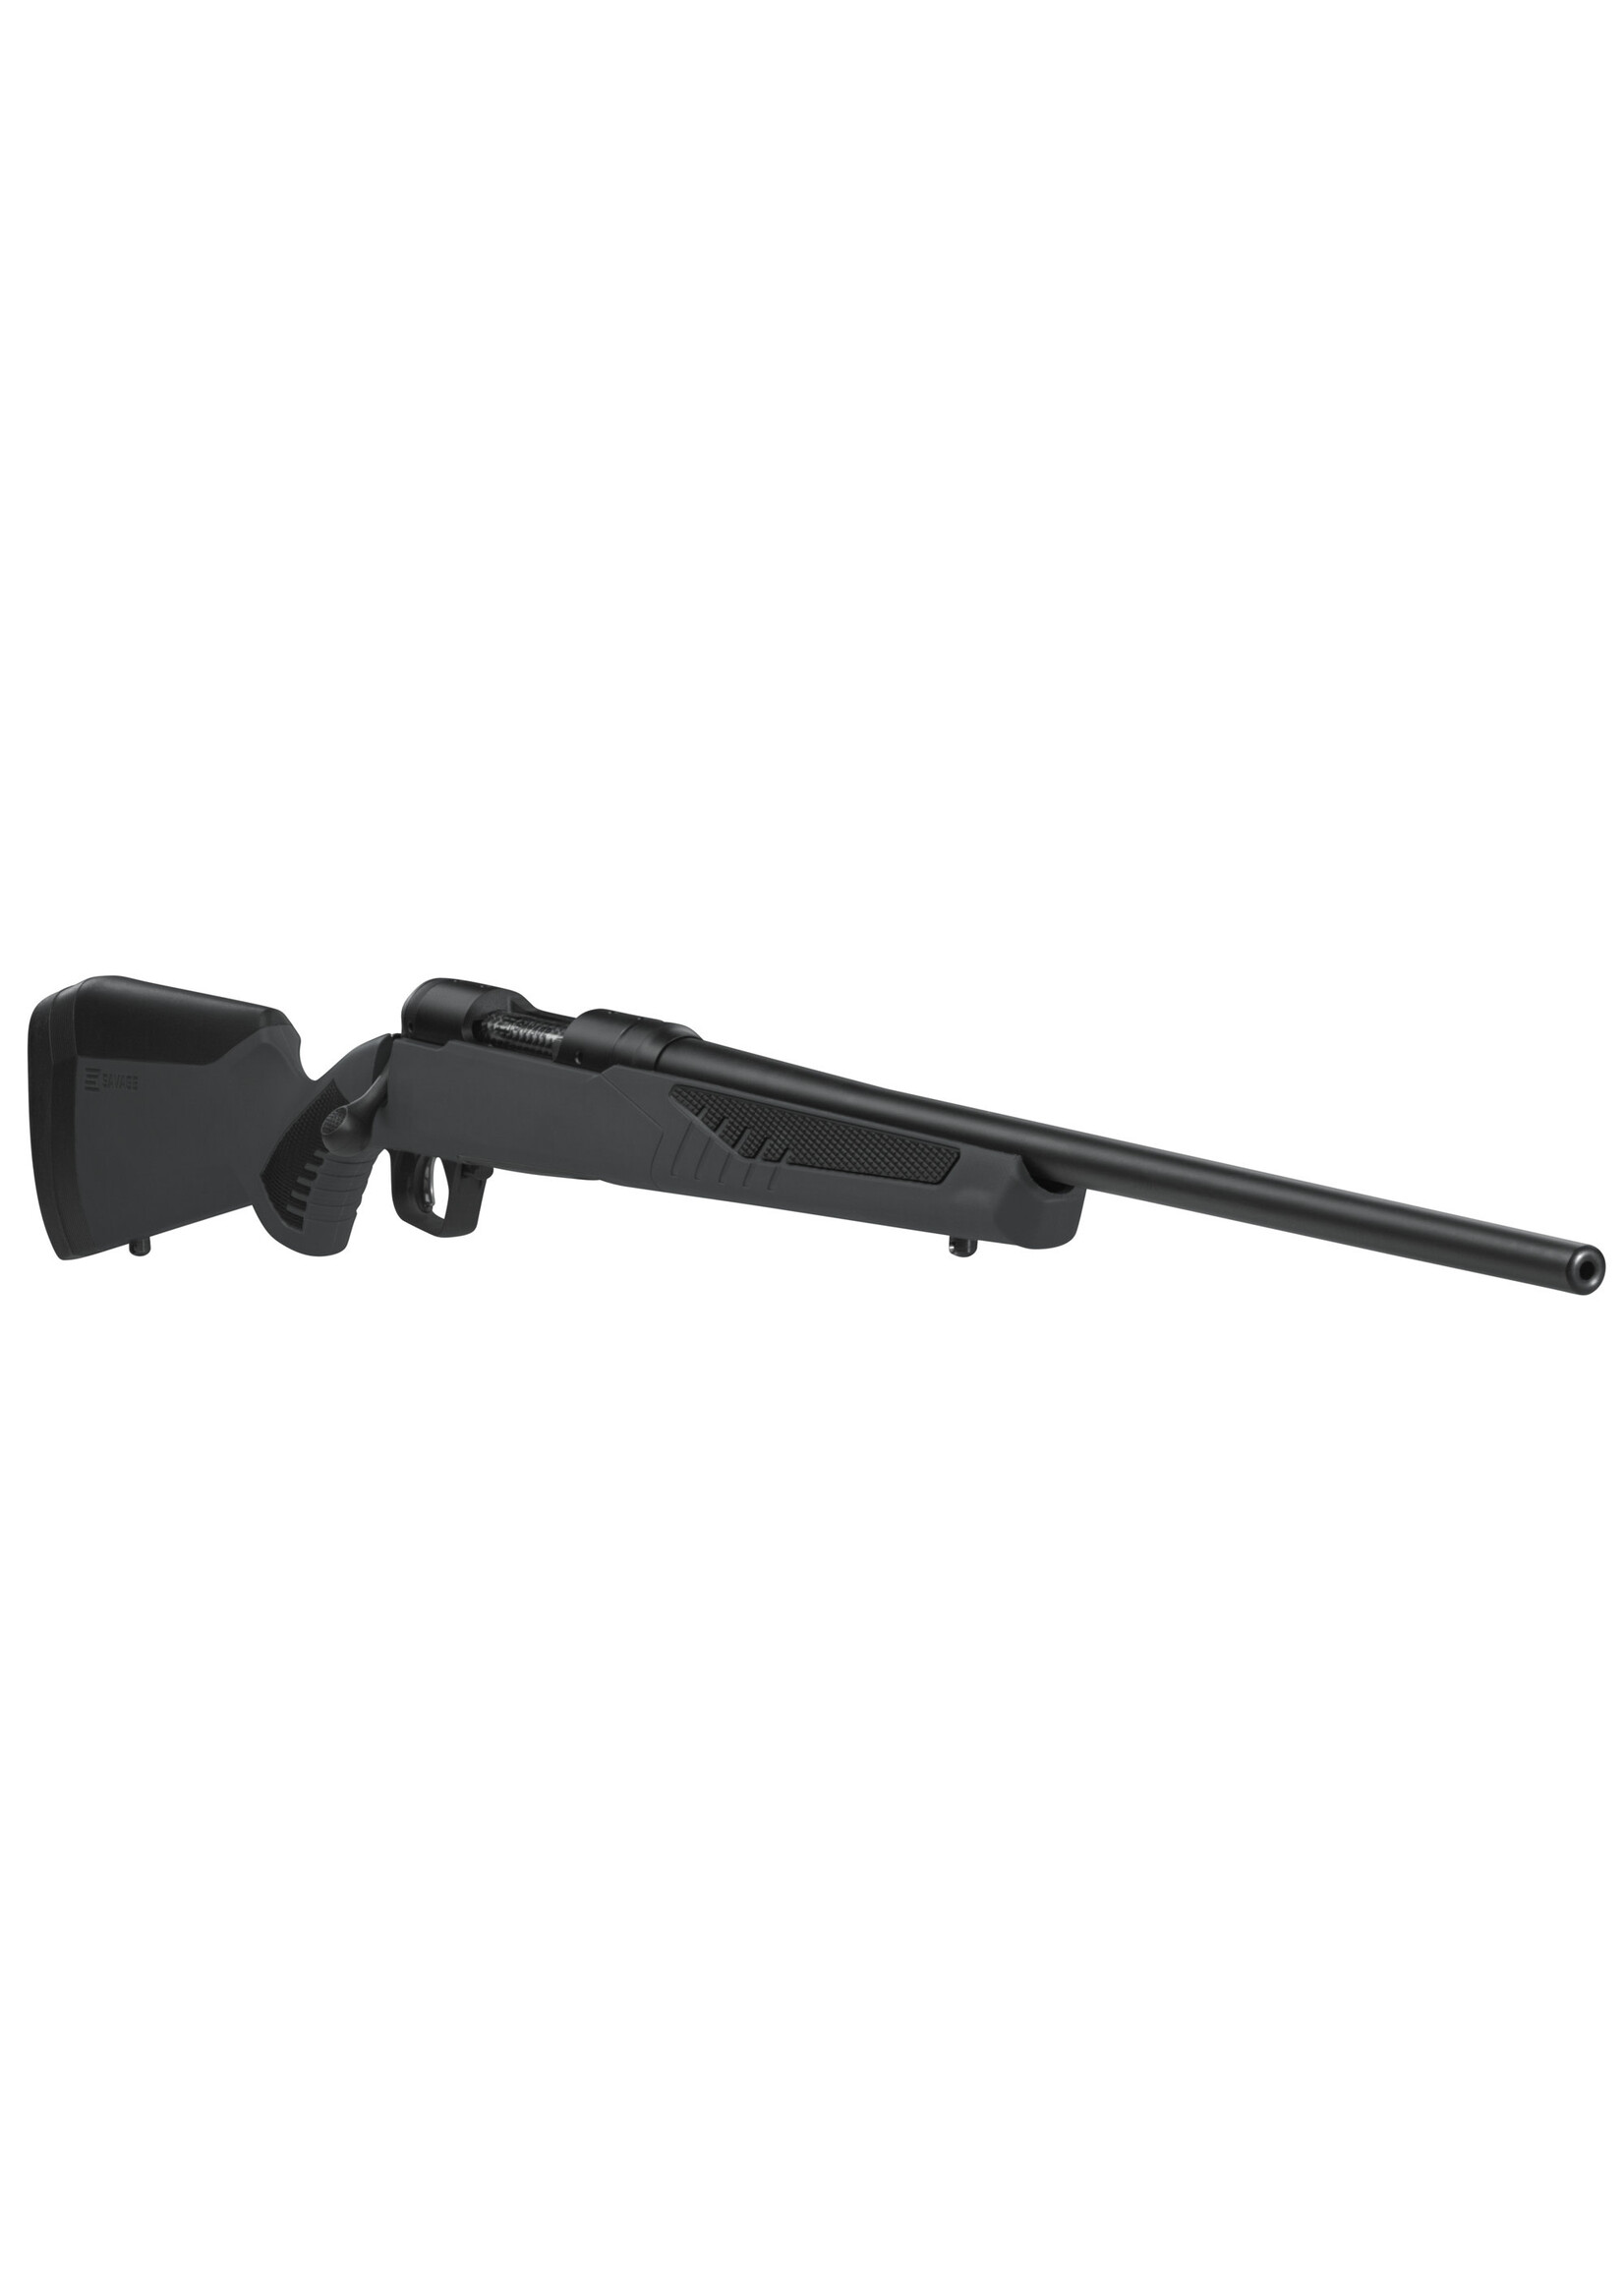 Savage Arms Savage, 110 Hunter, Bolt Action Rifle, Long Action, 30-06 Springfield, 22" Barrel , Matte Finish, Black, Gray Synthetic Stock, 1 Magazine, 4 Rounds, Right Hand